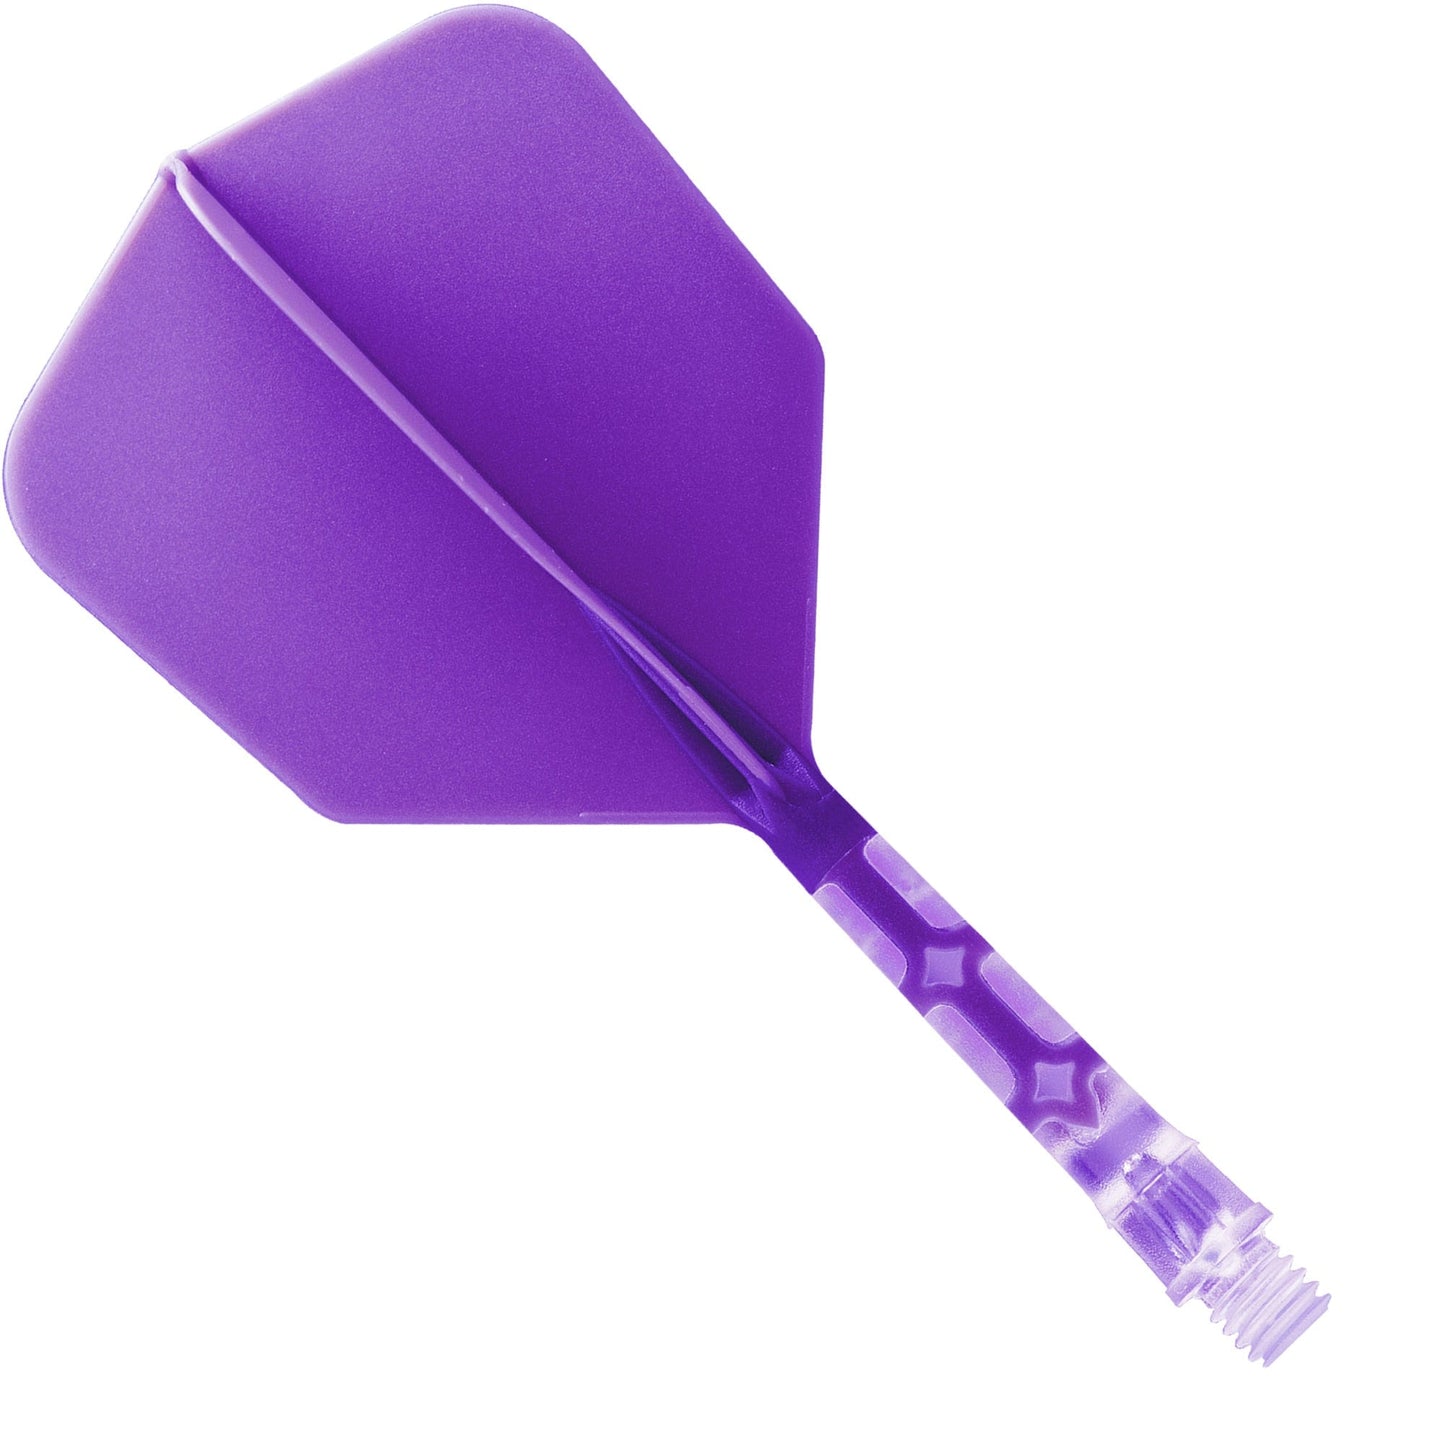 Cuesoul Rost T19 Integrated Dart Shaft and Flights - Big Wing - Clear with Purple Flight Medium